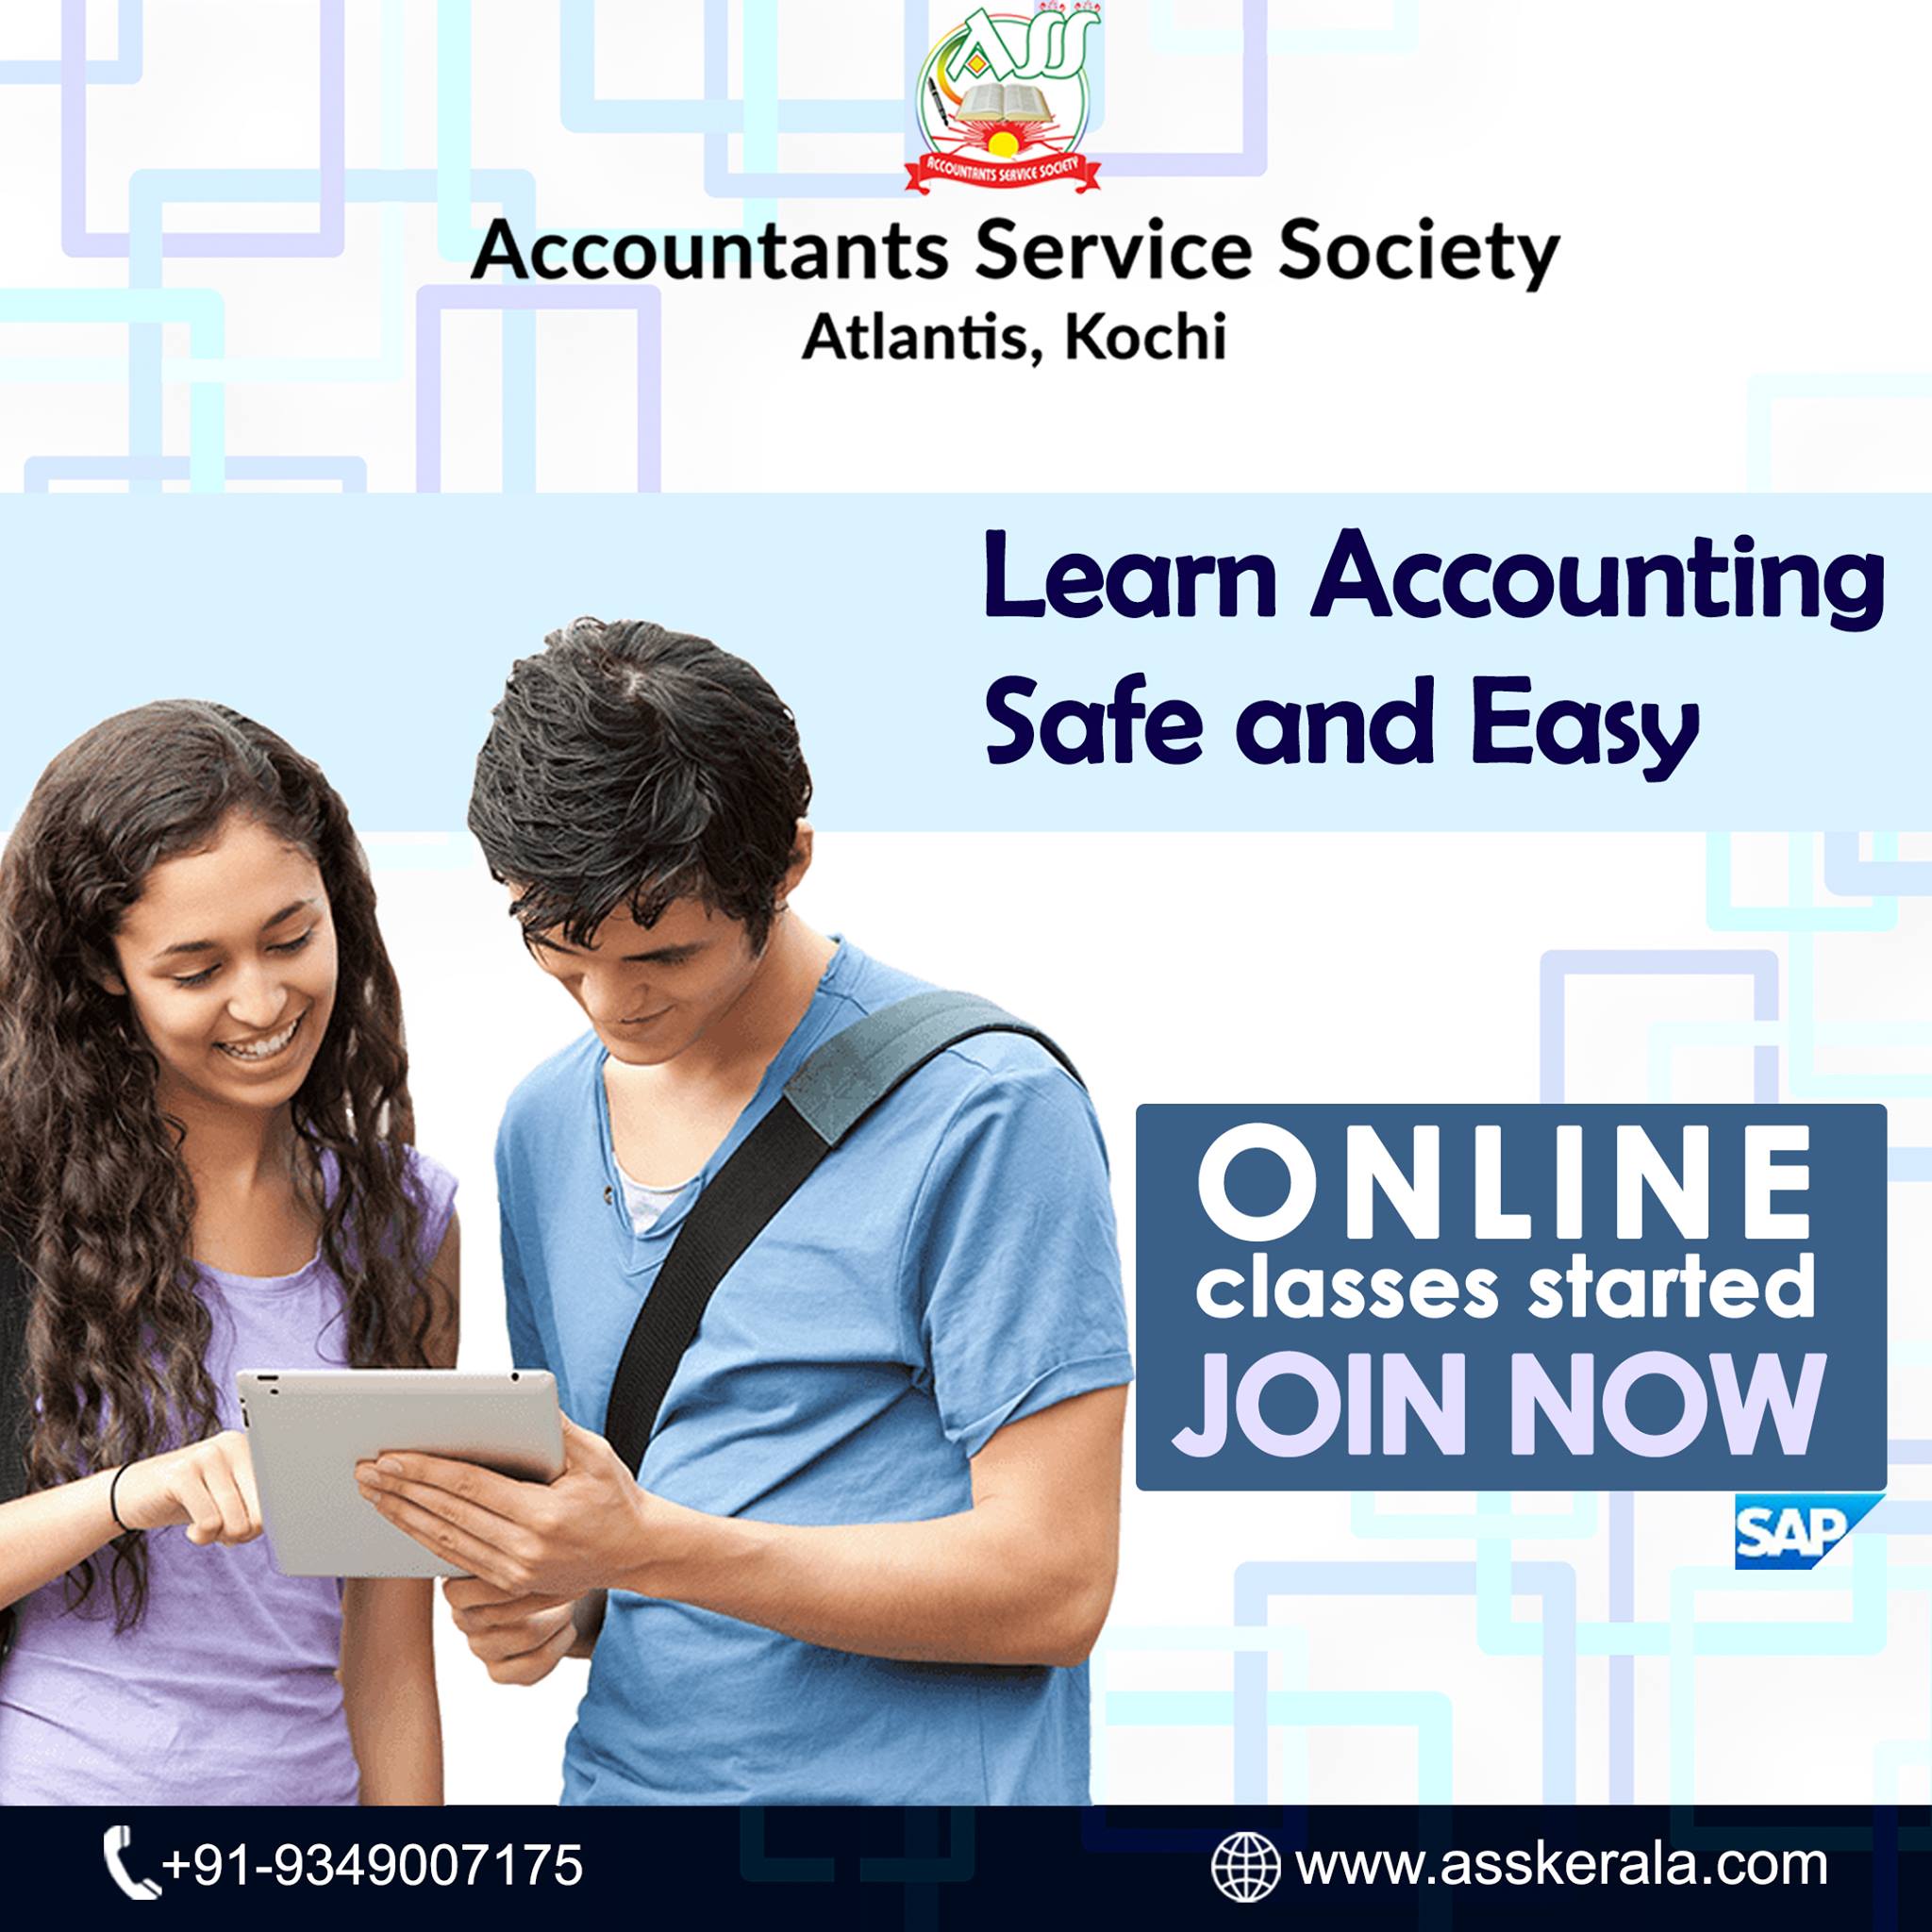 Accountants Service Society Professional Services | Accounting Services